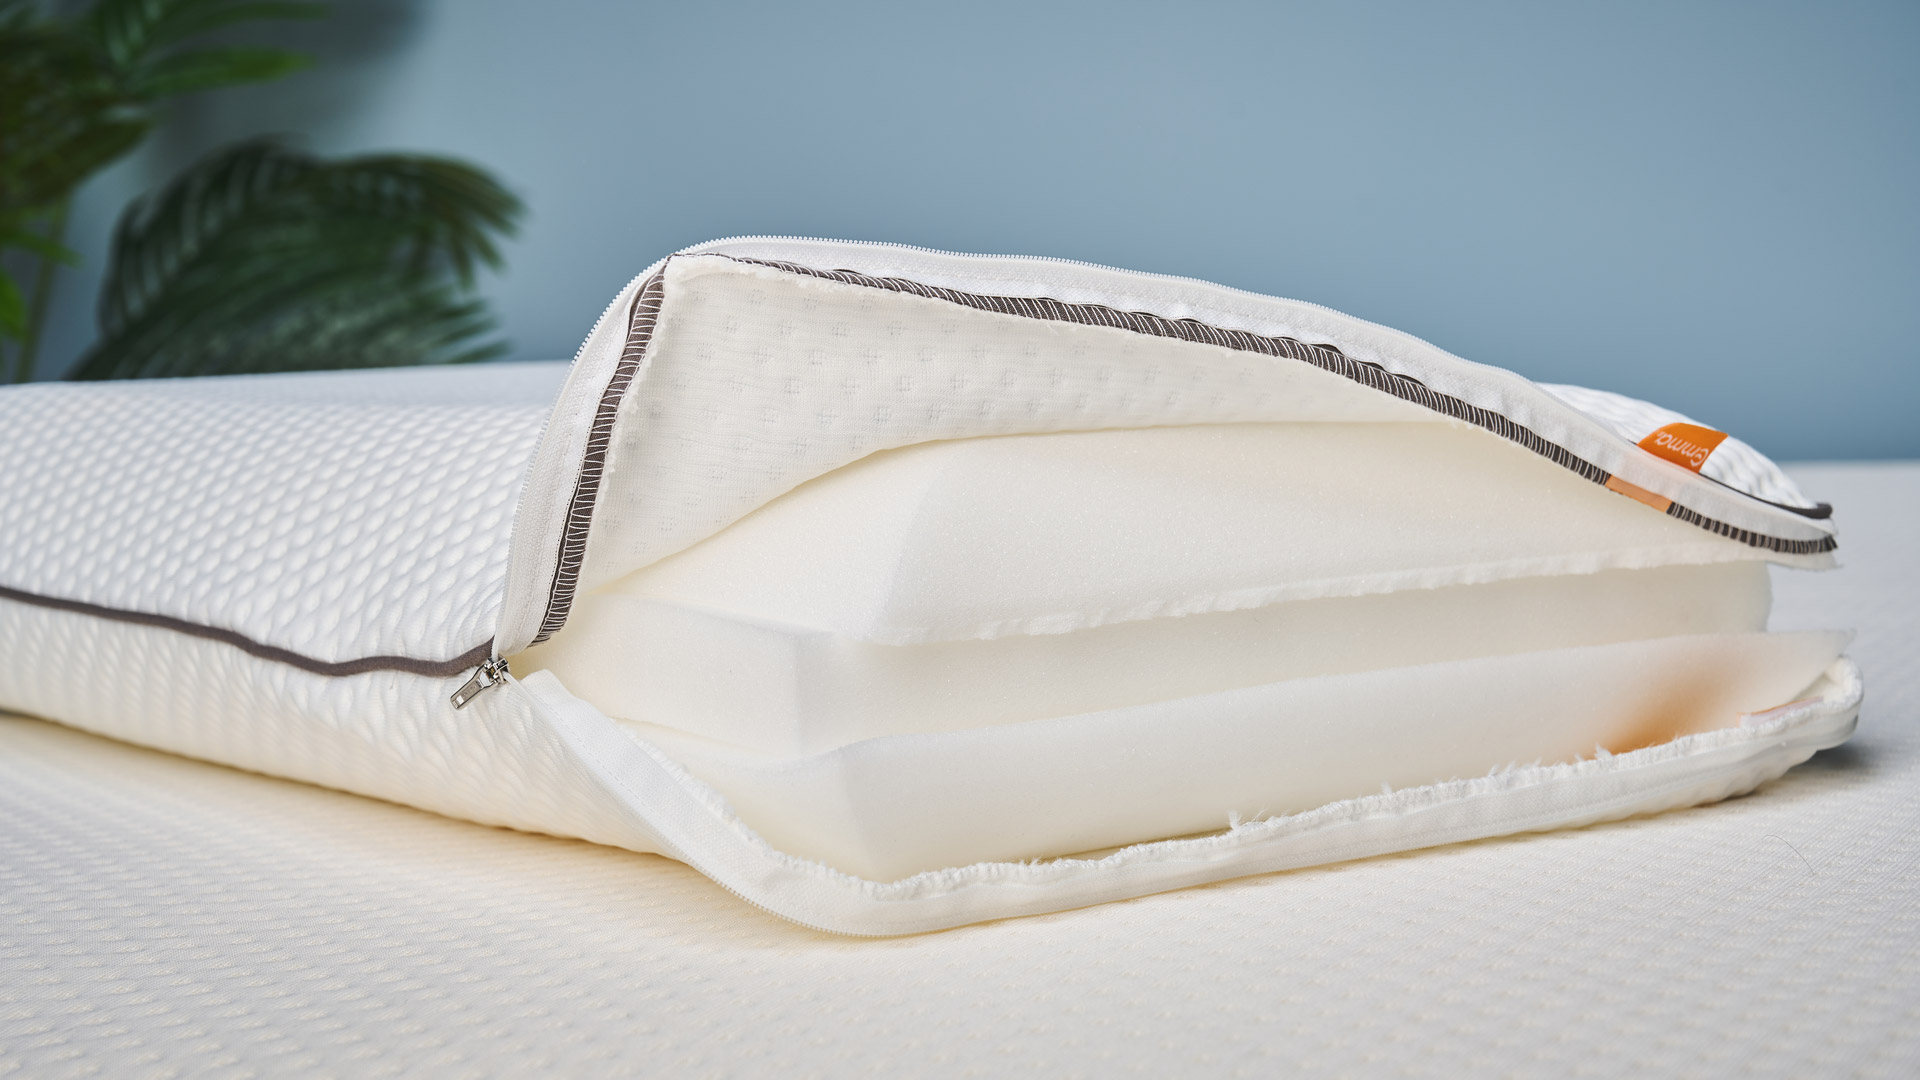 The Emma Original Pillow opened to show its filling